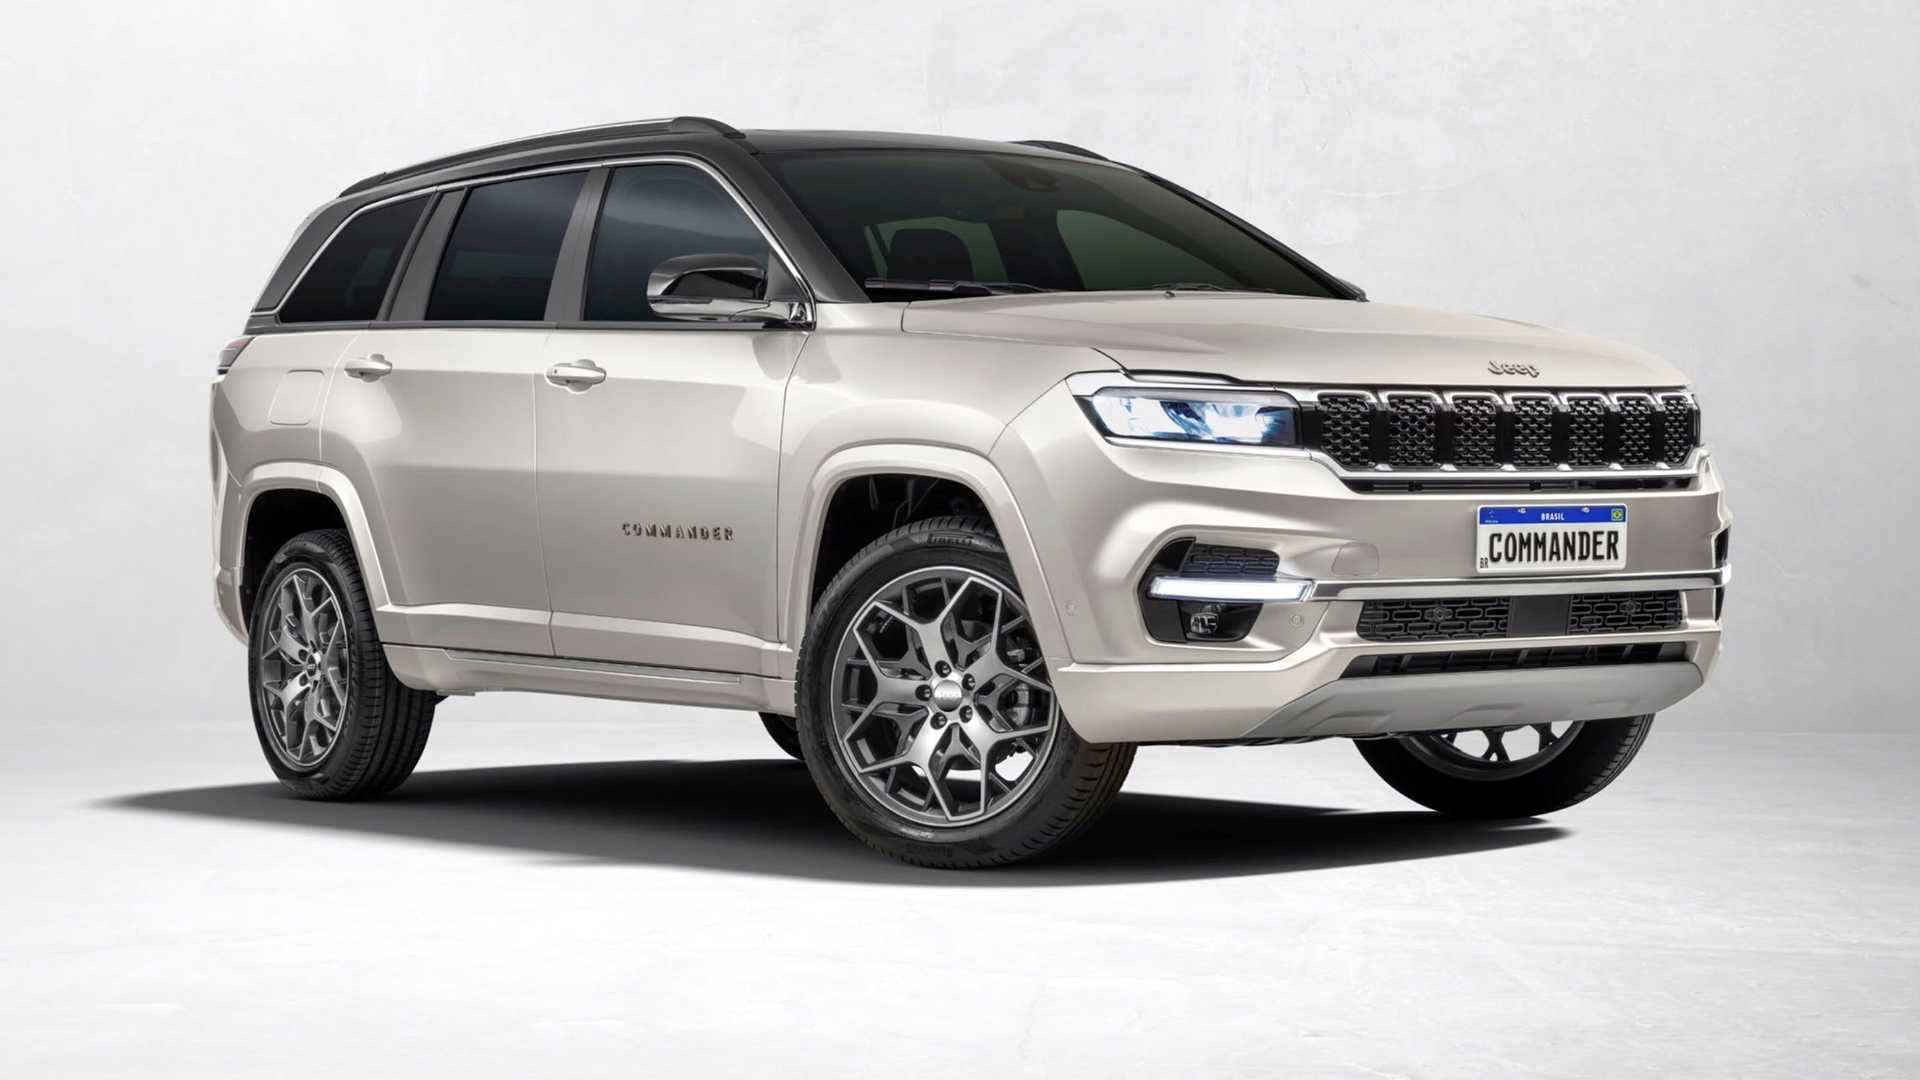 The Jeep Commander is a bigger, three-row SUV based on the Jeep Compass. Image: Jeep